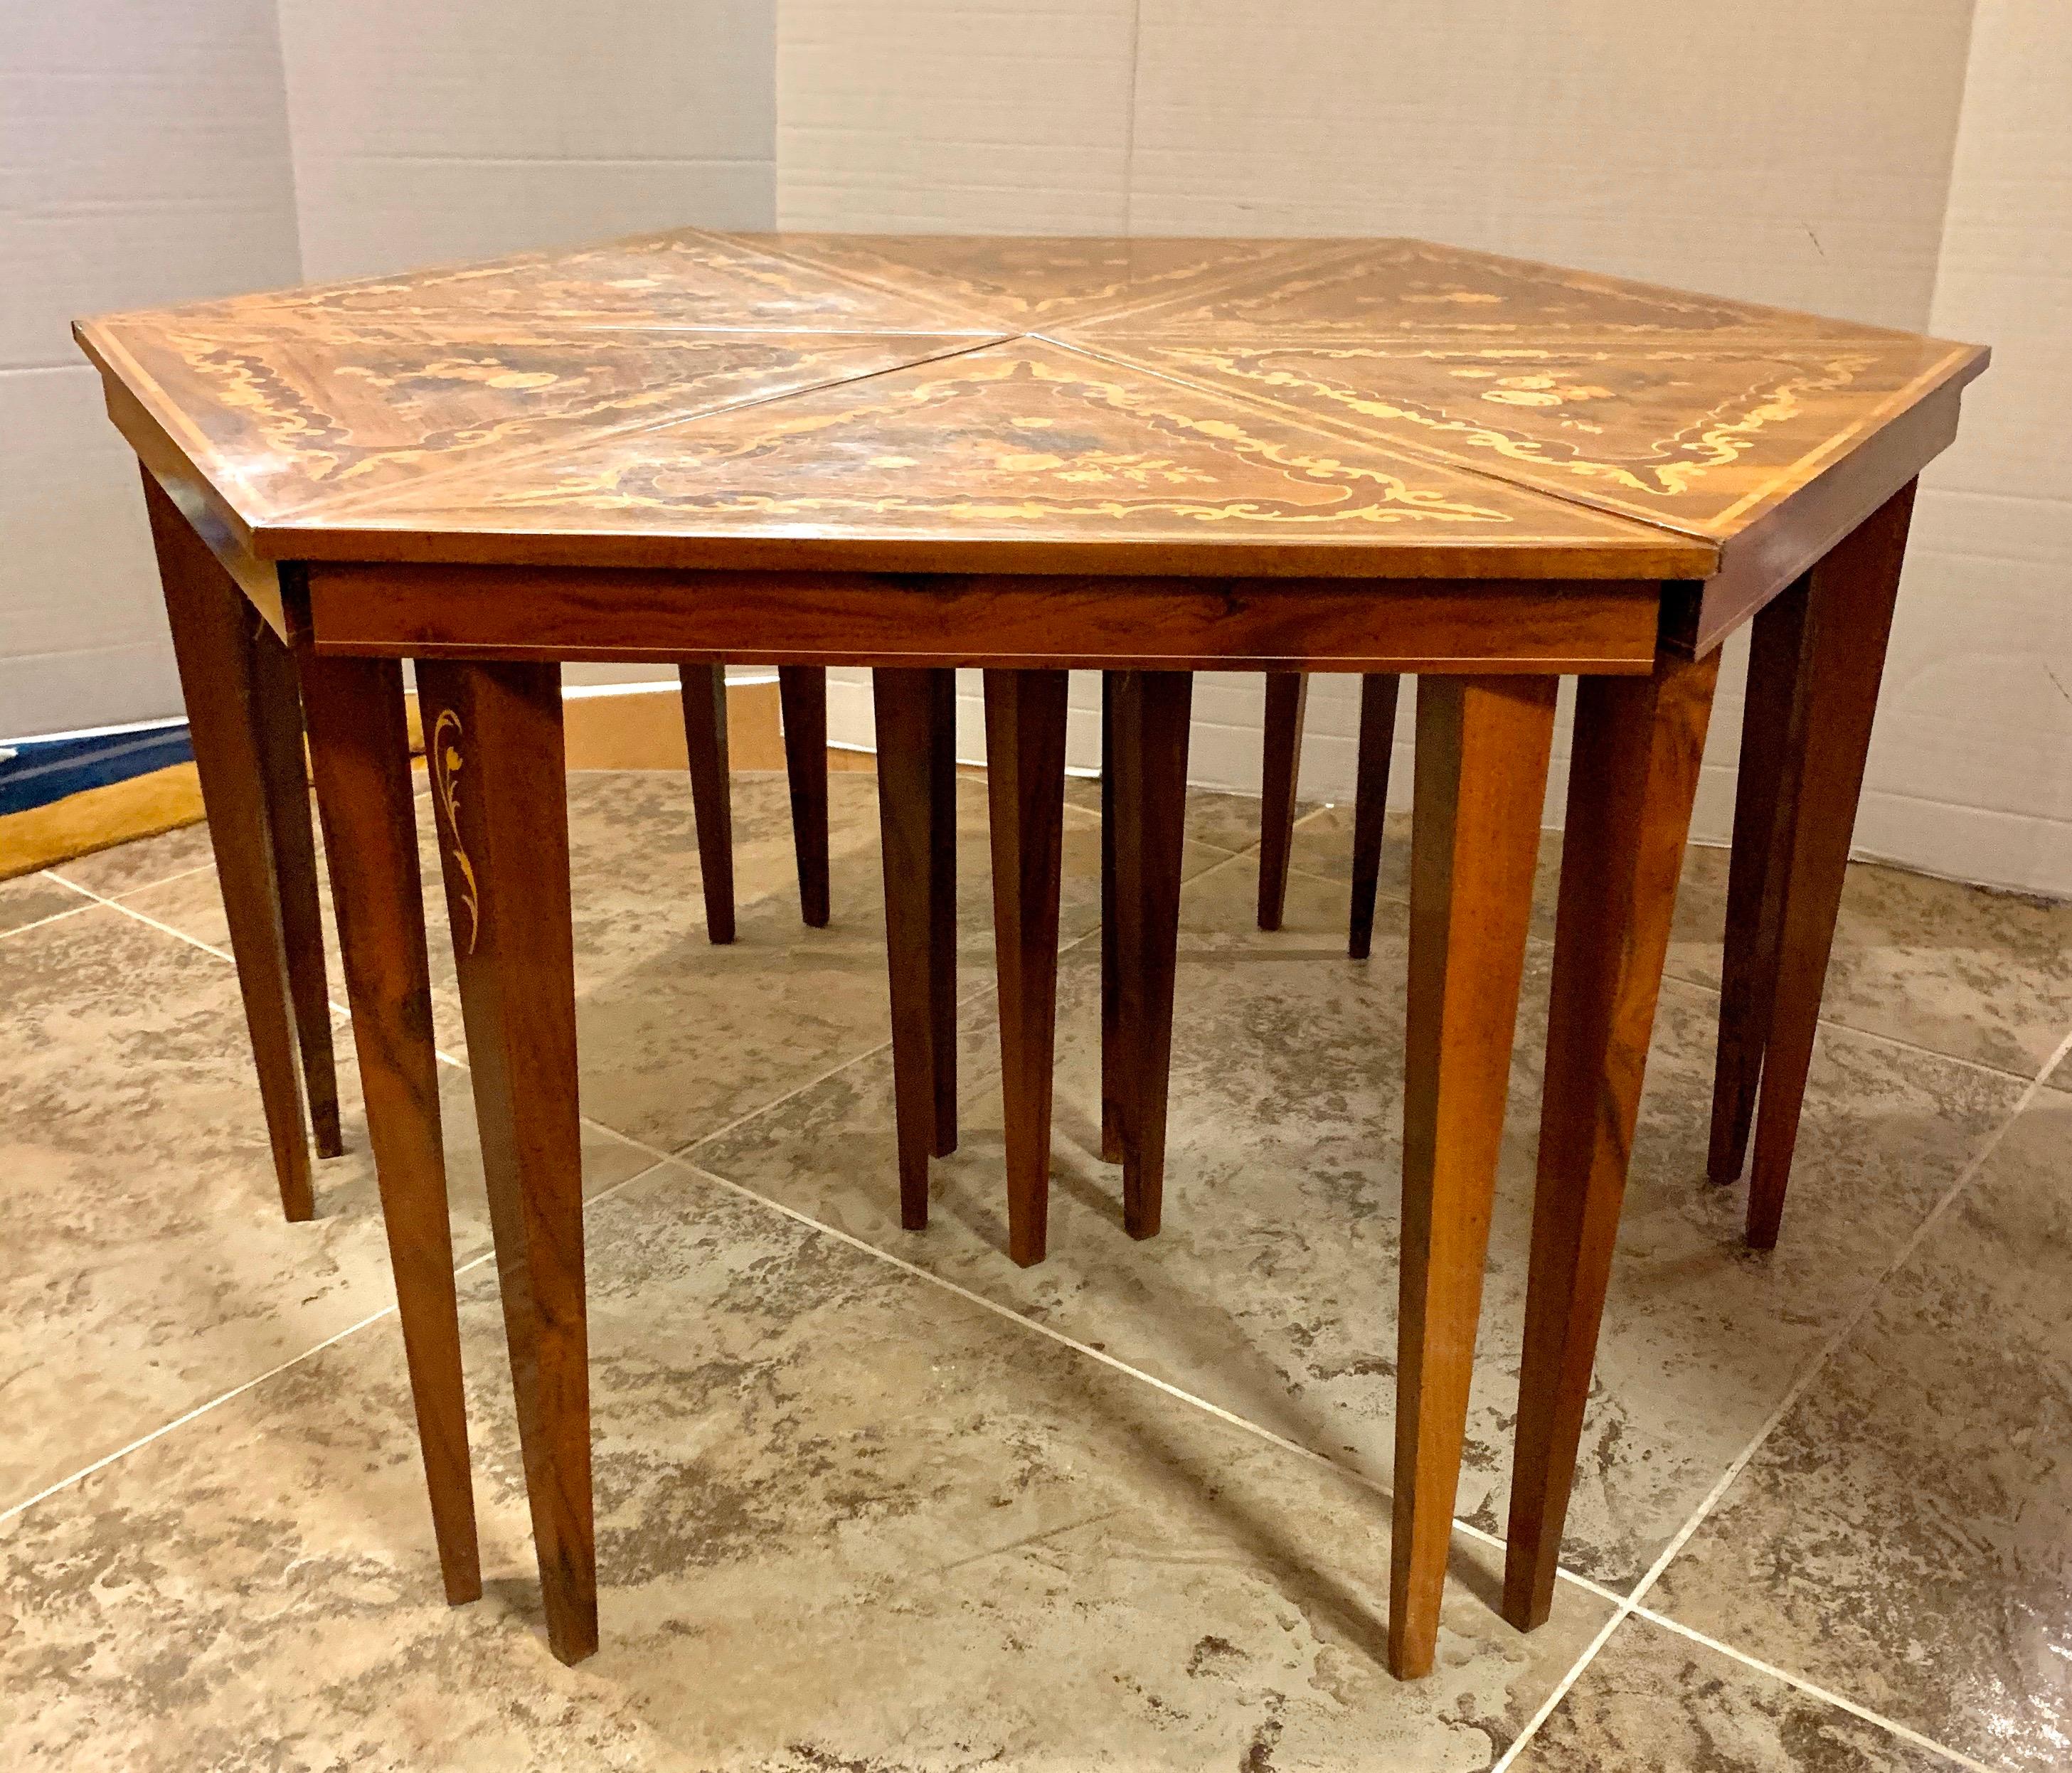 Italian marquetry hexagon shaped coffee table is made up of six separate triangular shaped tables. Each features intricate marquetry scroll work and a center floral motif. They can stand alone as side tables or put together as one coffee table. Made